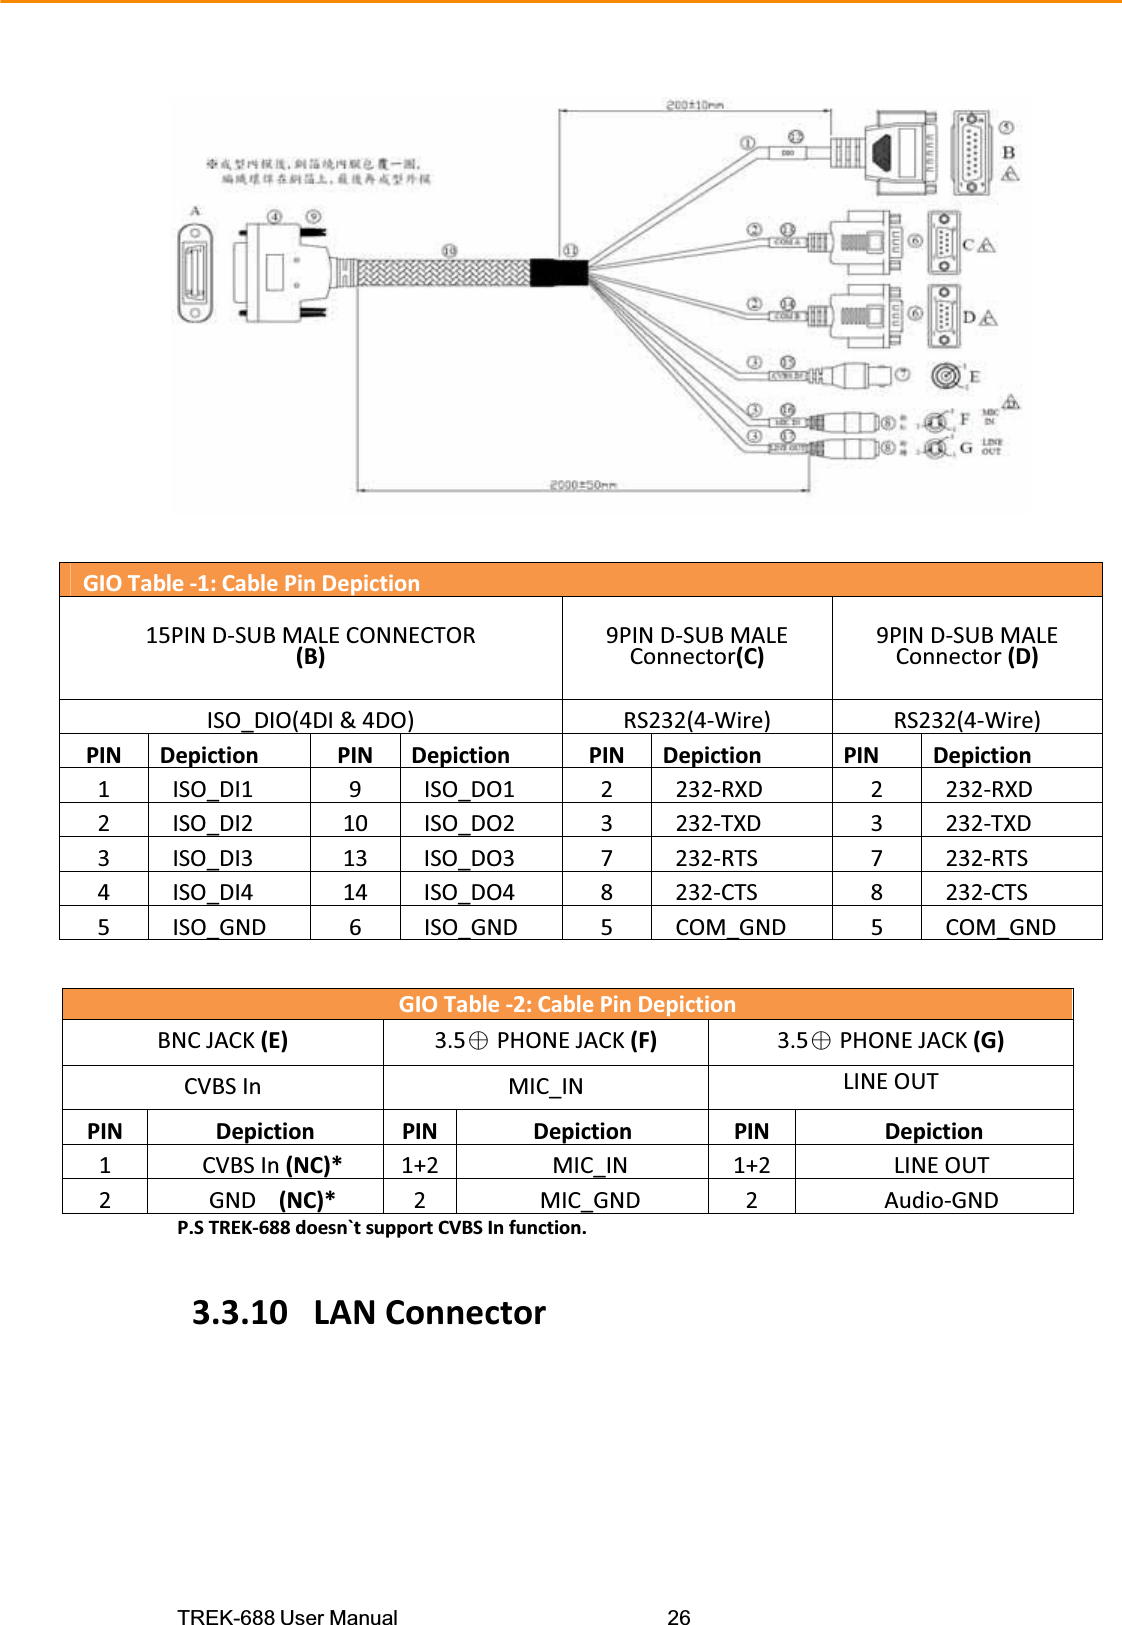 TREK-688 User Manual  26GIOTableͲ1:CablePinDepiction15PINDͲSUBMALECONNECTOR(B)9PINDͲSUBMALEConnector(C) 9PINDͲSUBMALEConnector(D)ISO_DIO(4DI&amp;4DO) RS232(4ͲWire) RS232(4ͲWire)PINDepictionPINDepictionPINDepictionPINDepiction1 ISO_DI1 9 ISO_DO1 2 232ͲRXD 2 232ͲRXD2 ISO_DI2 10 ISO_DO2 3 232ͲTXD 3 232ͲTXD3 ISO_DI3 13 ISO_DO3 7 232ͲRTS 7 232ͲRTS4 ISO_DI4 14 ISO_DO4 8 232ͲCTS 8 232ͲCTS5 ISO_GND 6 ISO_GND 5 COM_GND 5 COM_GNDGIOTableͲ2:CablePinDepictionBNCJACK(E) 3.5ˠPHONEJACK(F) 3.5ˠPHONEJACK(G)CVBSIn MIC_IN LINEOUTPINDepictionPINDepictionPINDepiction1 CVBSIn(NC)* 1+2 MIC_IN 1+2 LINEOUT2 GND(NC)* 2 MIC_GND 2 AudioͲGNDP.STREKͲ688doesn`tsupportCVBSInfunction.3.3.10LANConnector